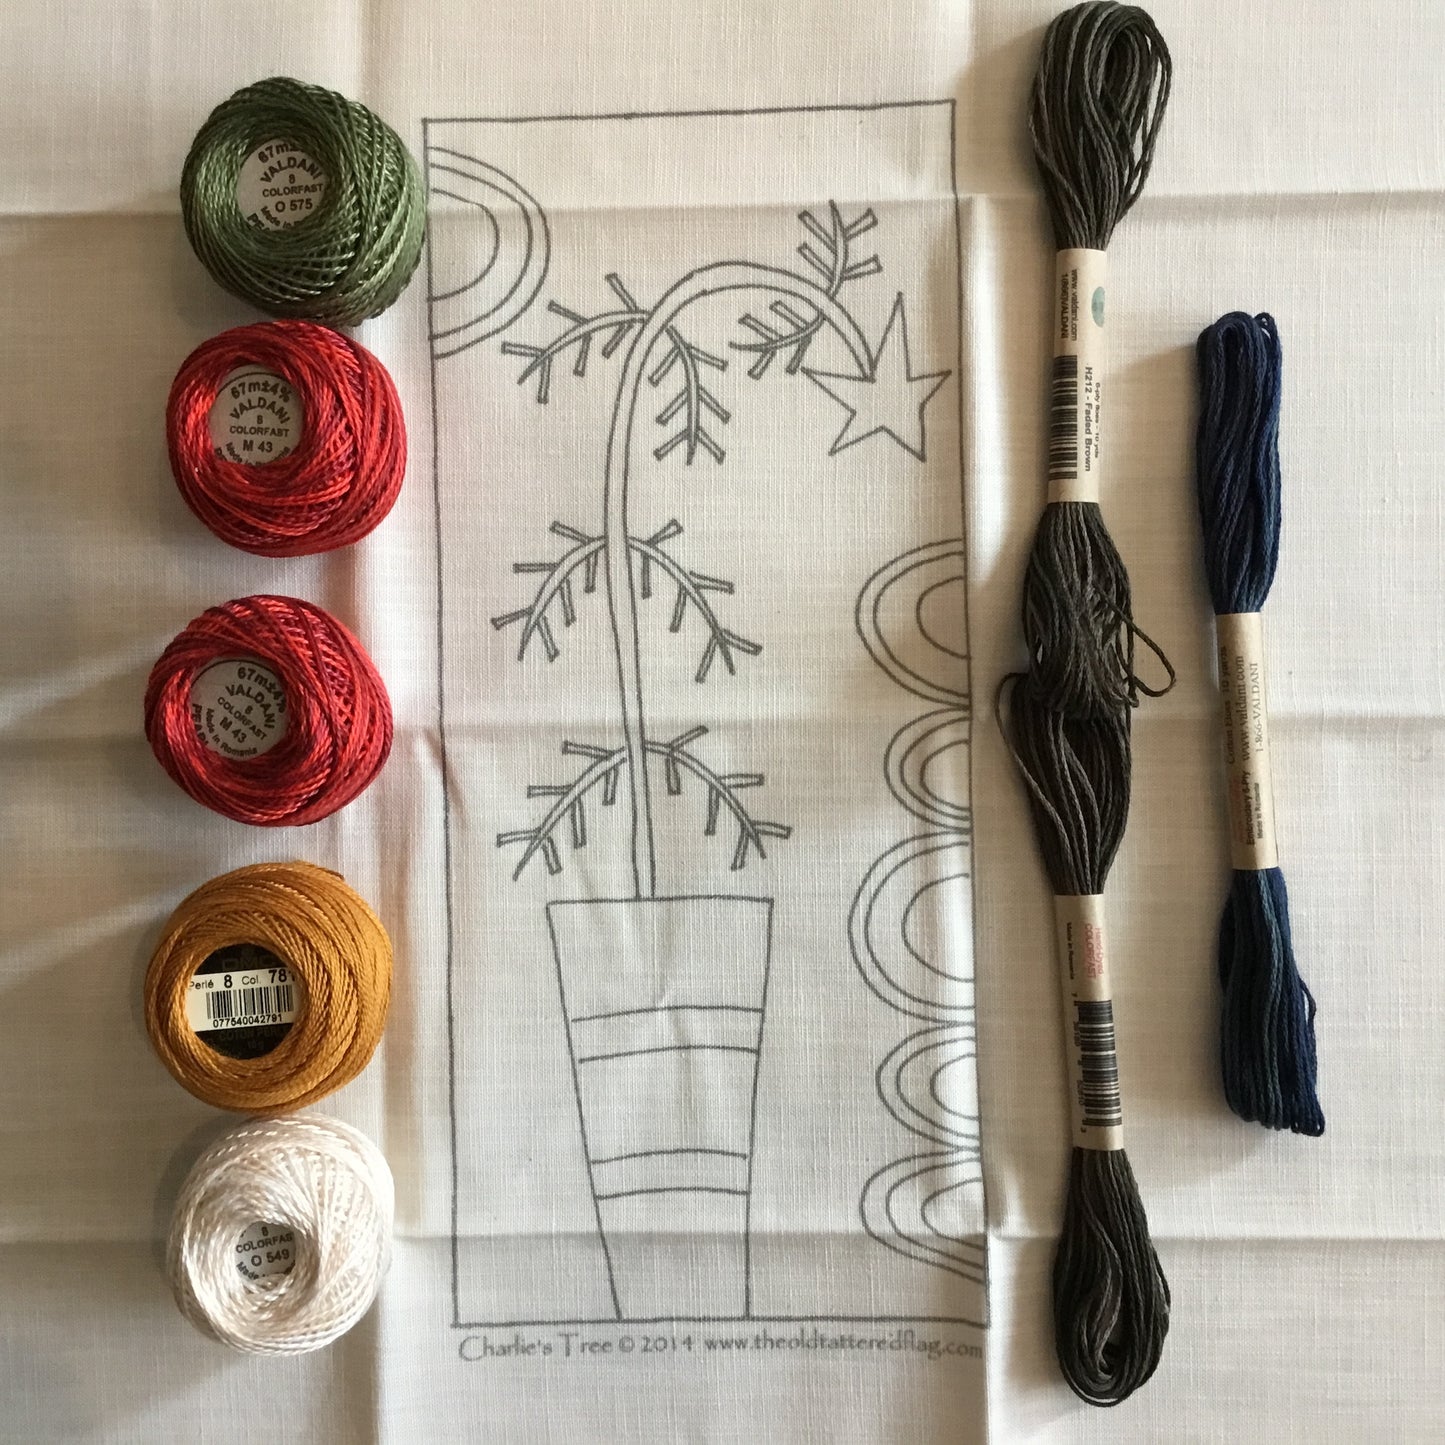 Punch Needle Embroidery - "Charlie's Tree" Pattern